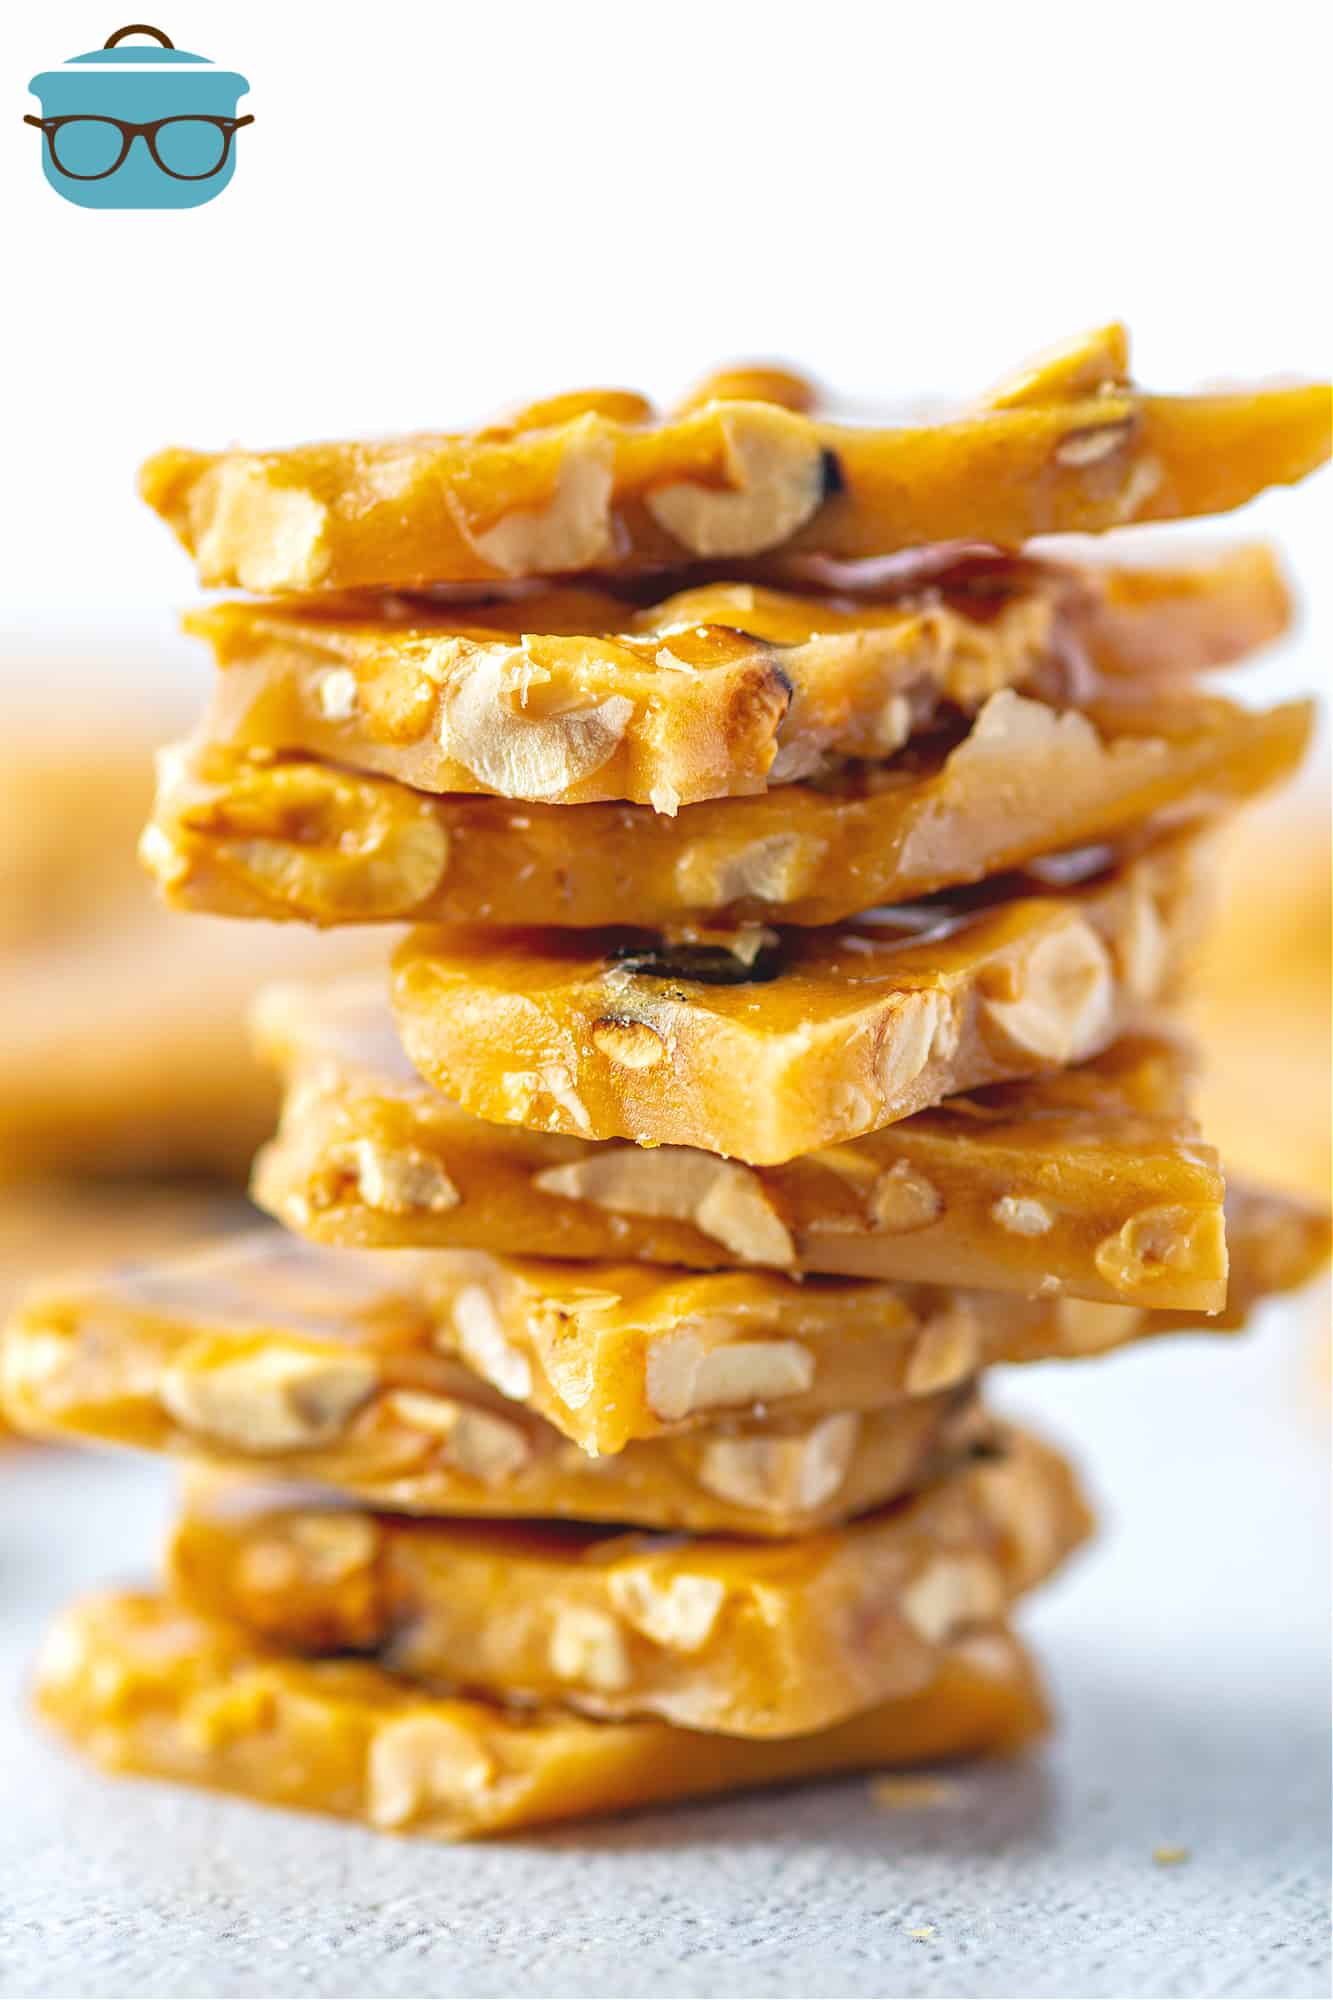 Homemade Peanut Brittle Candy pieces shown stacked in a pile.